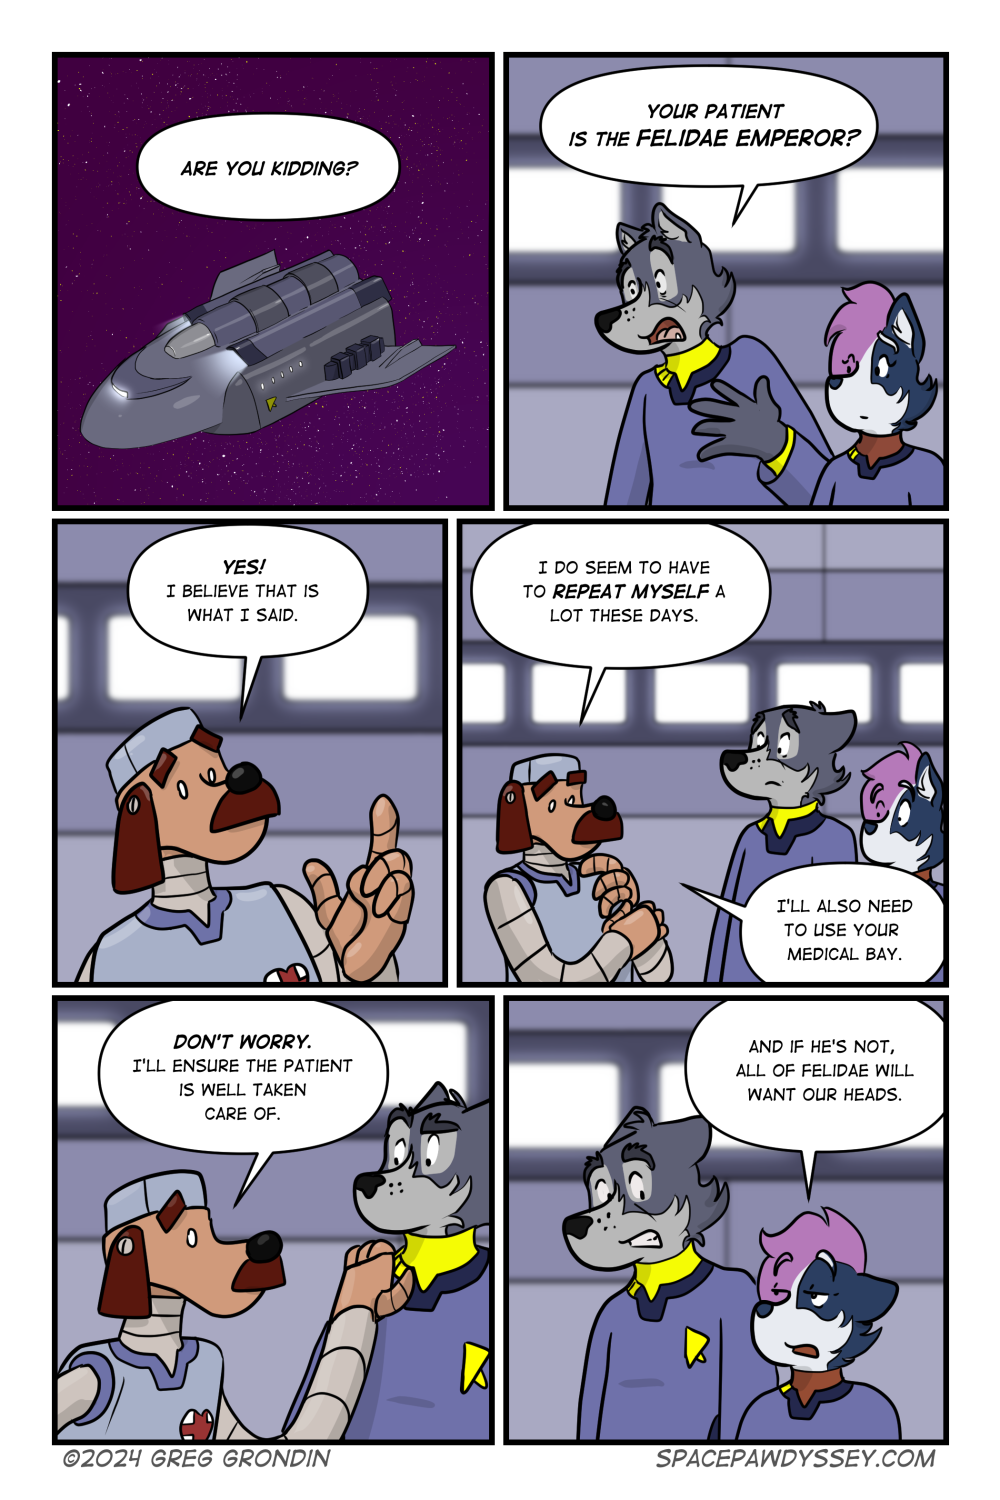 Space Pawdyssey #659